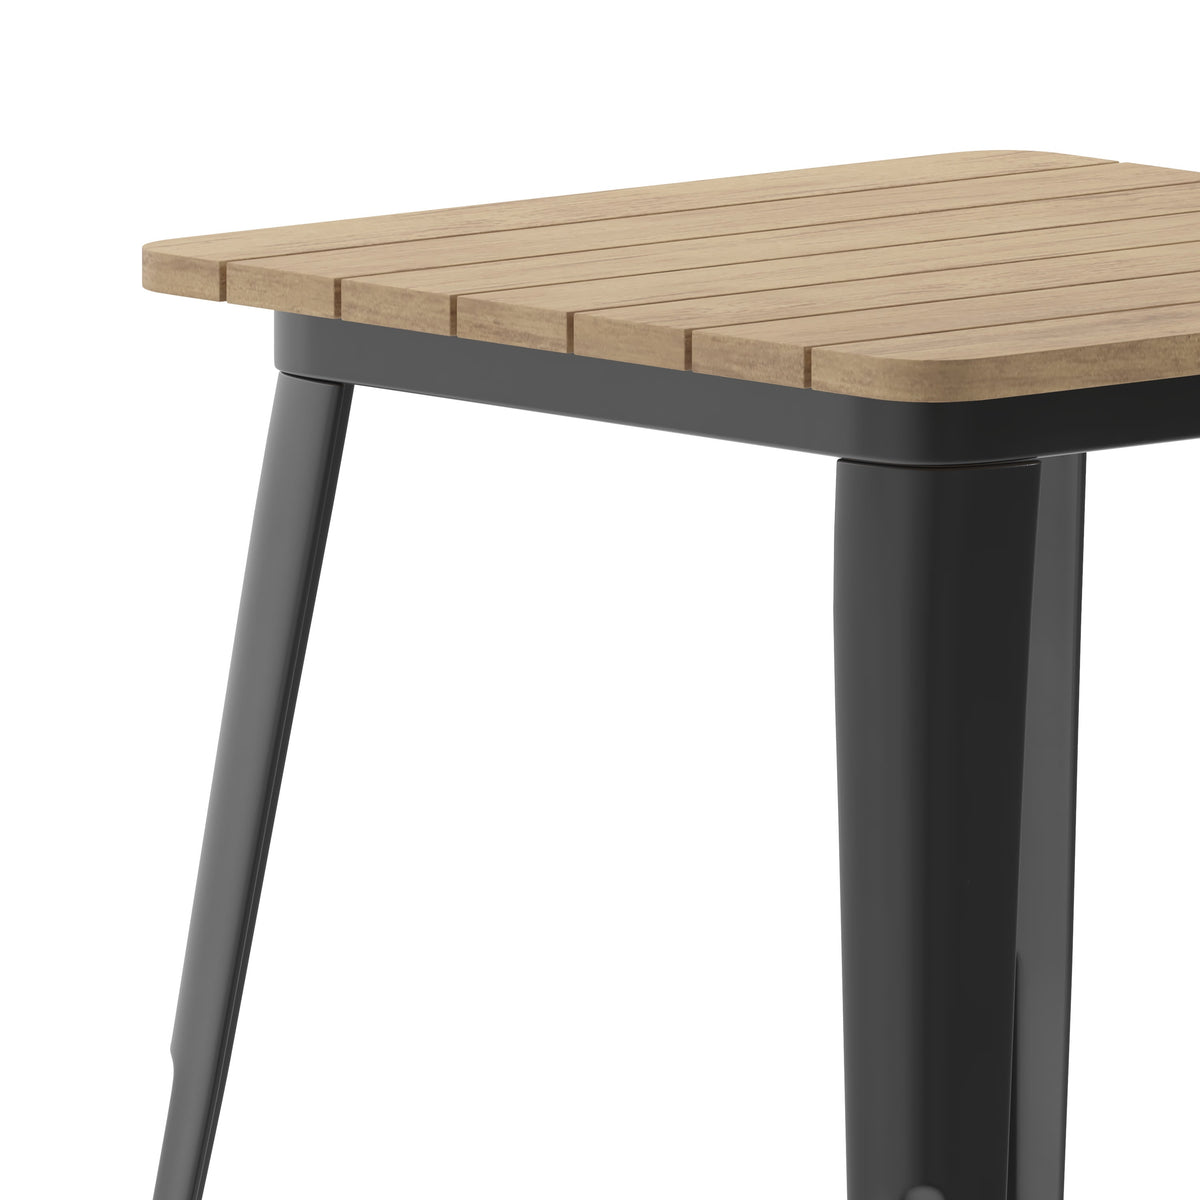 Brown/Black |#| 23.75inch SQ Commercial Poly Resin Restaurant Table with Steel Frame-Brown/Black